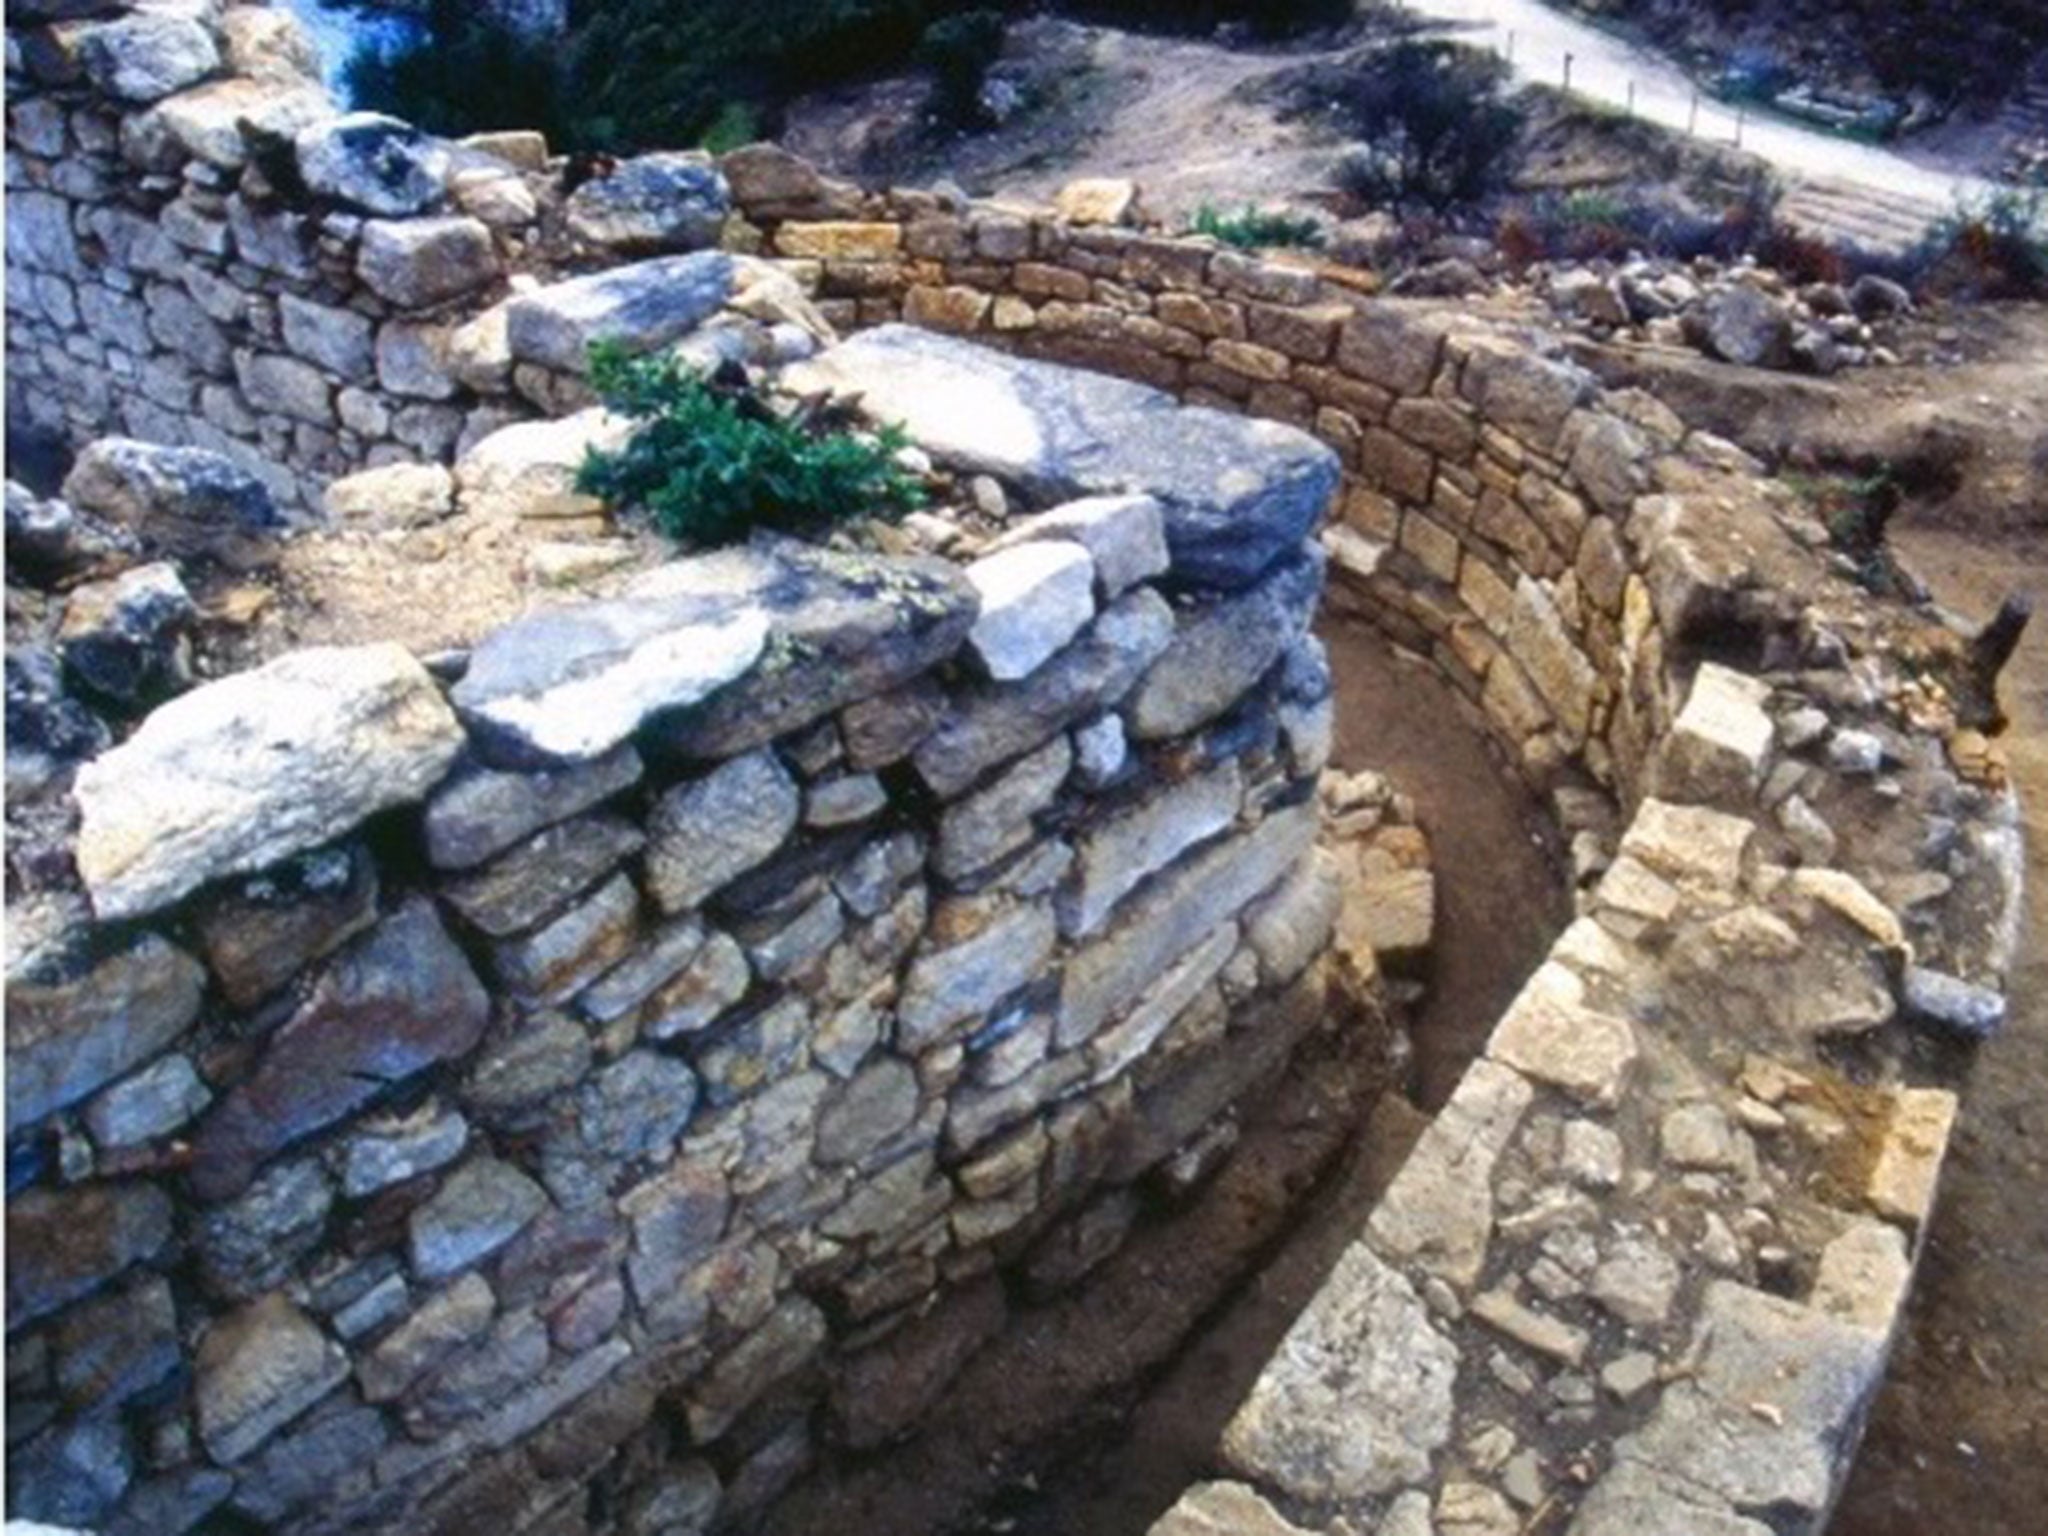 &#13;
The site believed to be Aristotle's tomb &#13;